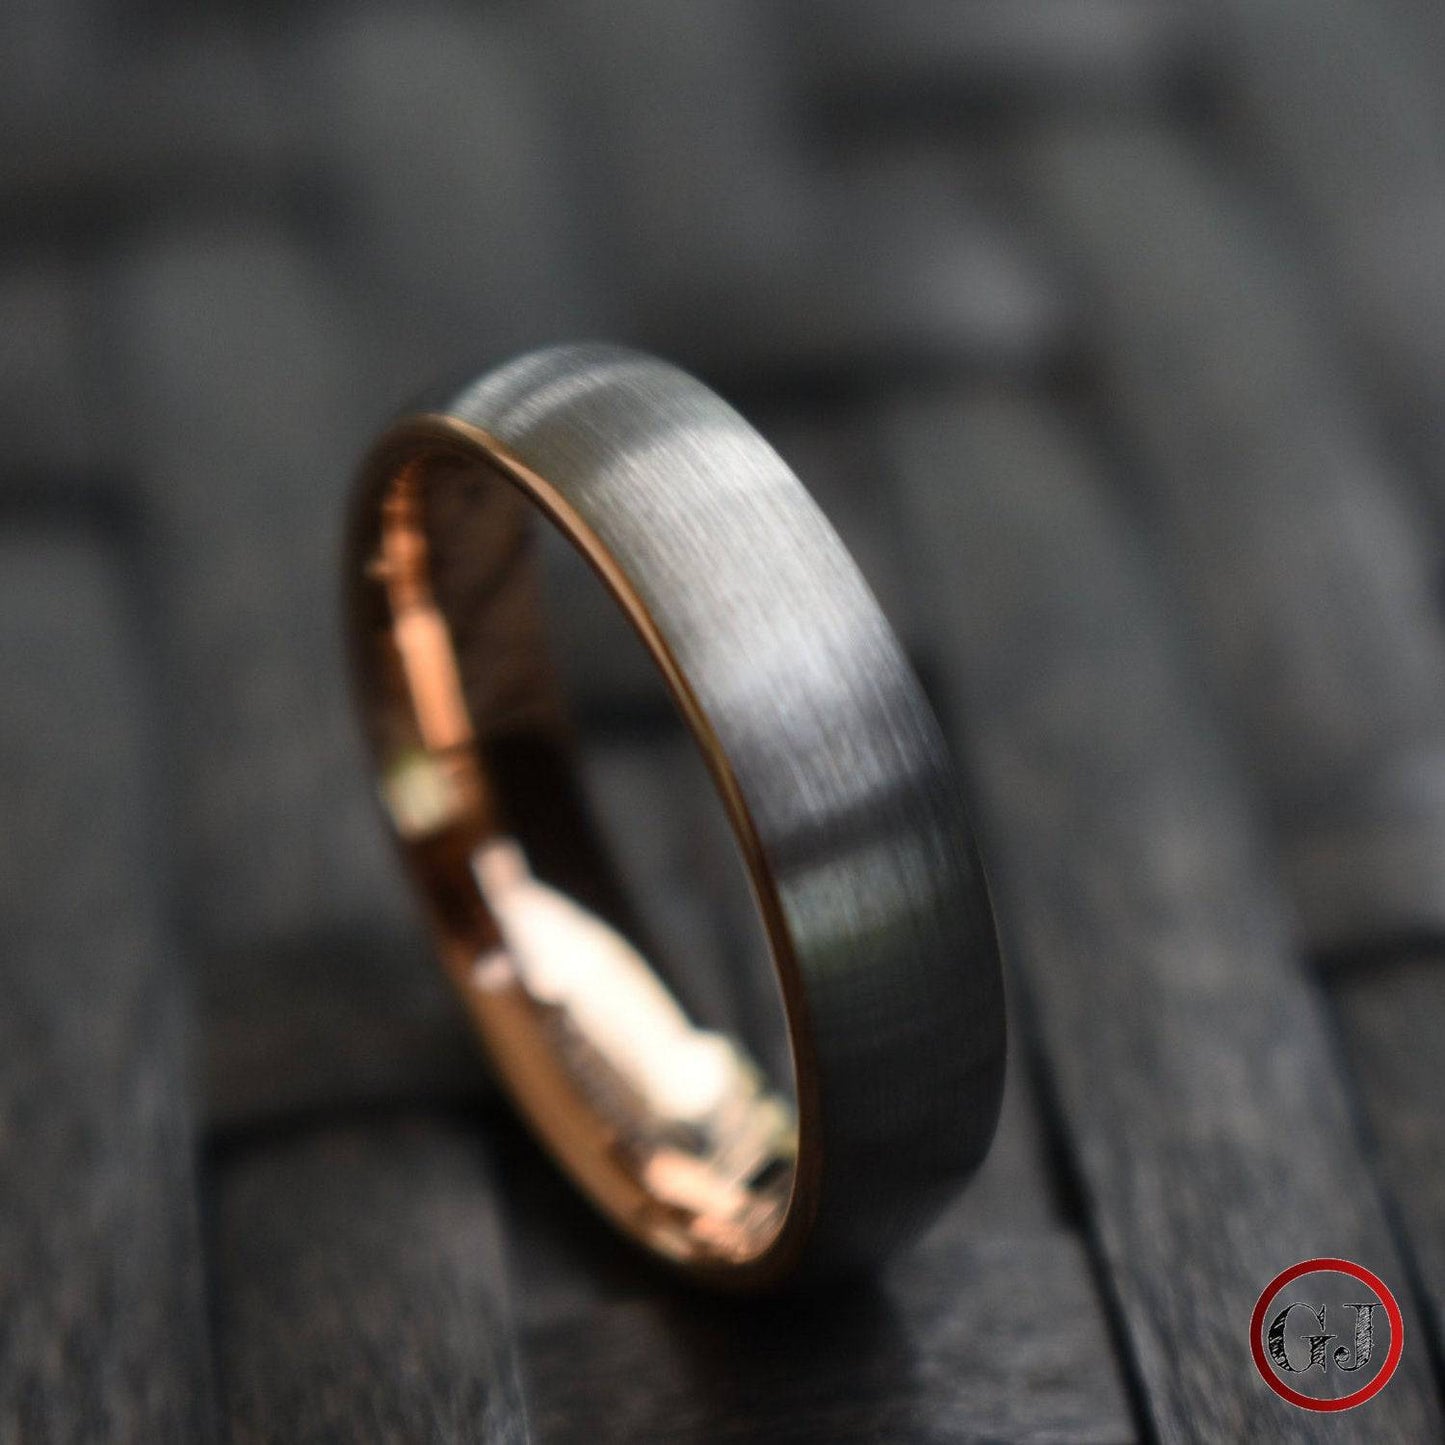 Tungsten 6mm Ring Brushed Silver with Rose Gold Comfort fit band - Tungsten Titans